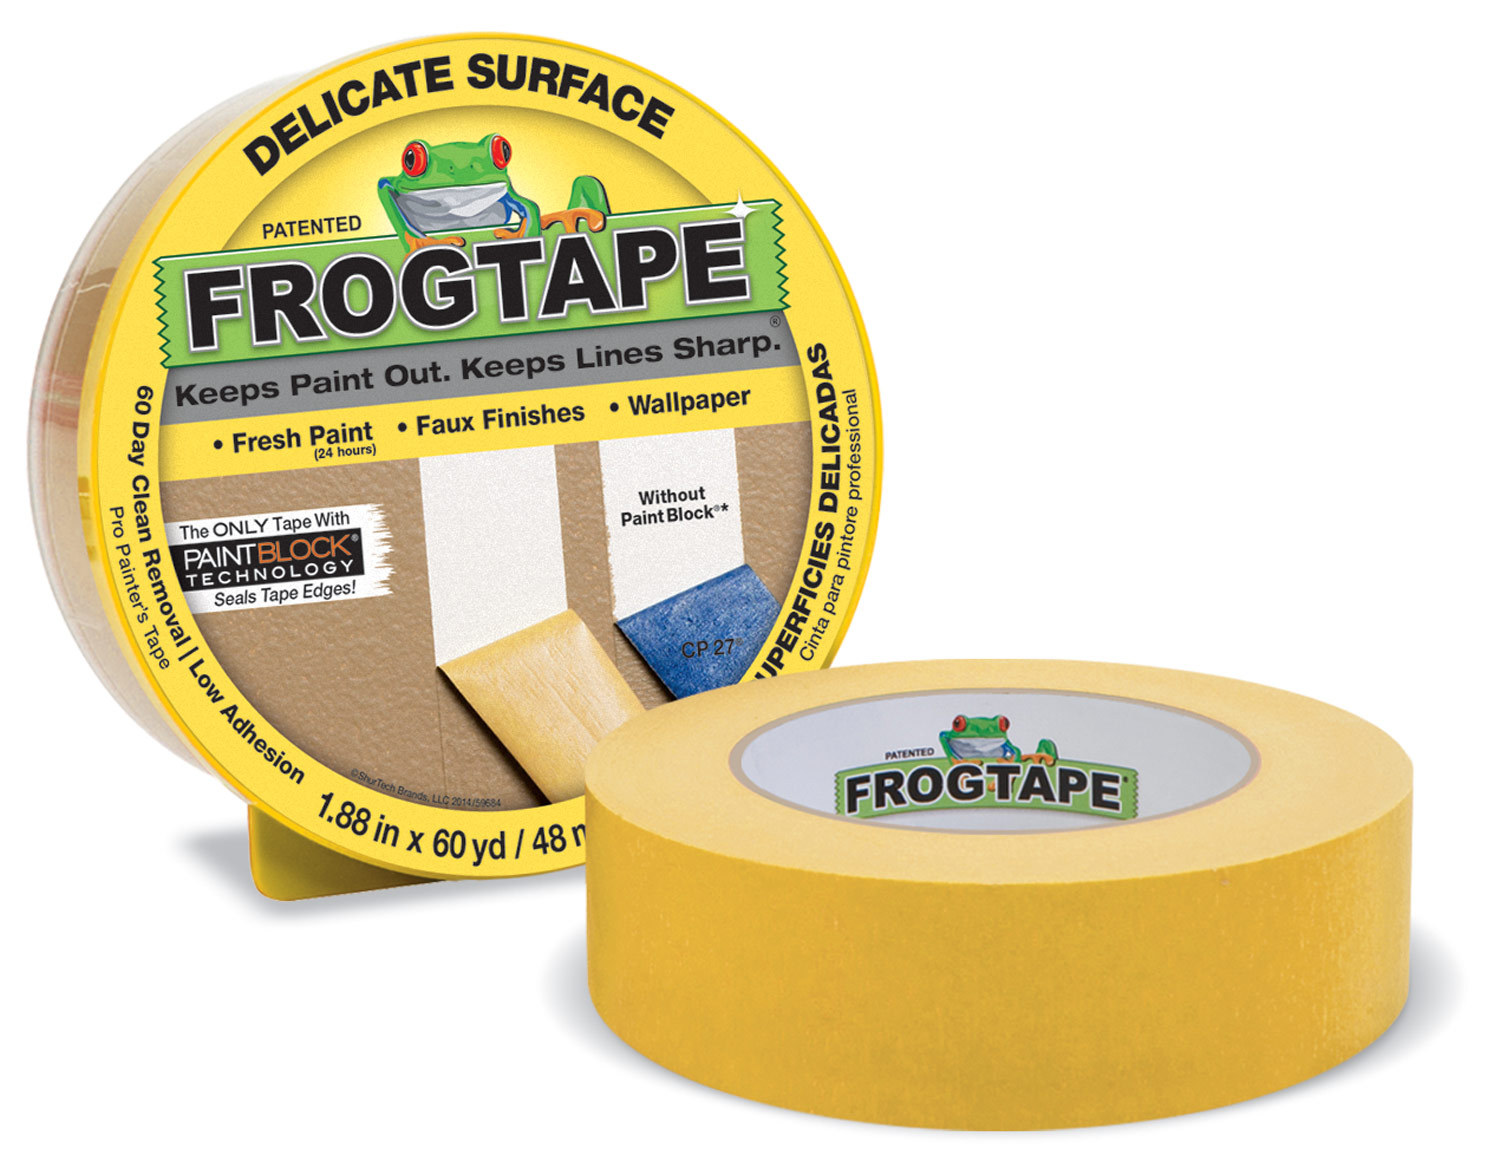 frog-tape-vs-painters-tape-is-it-worth-the-money-just-add-paint